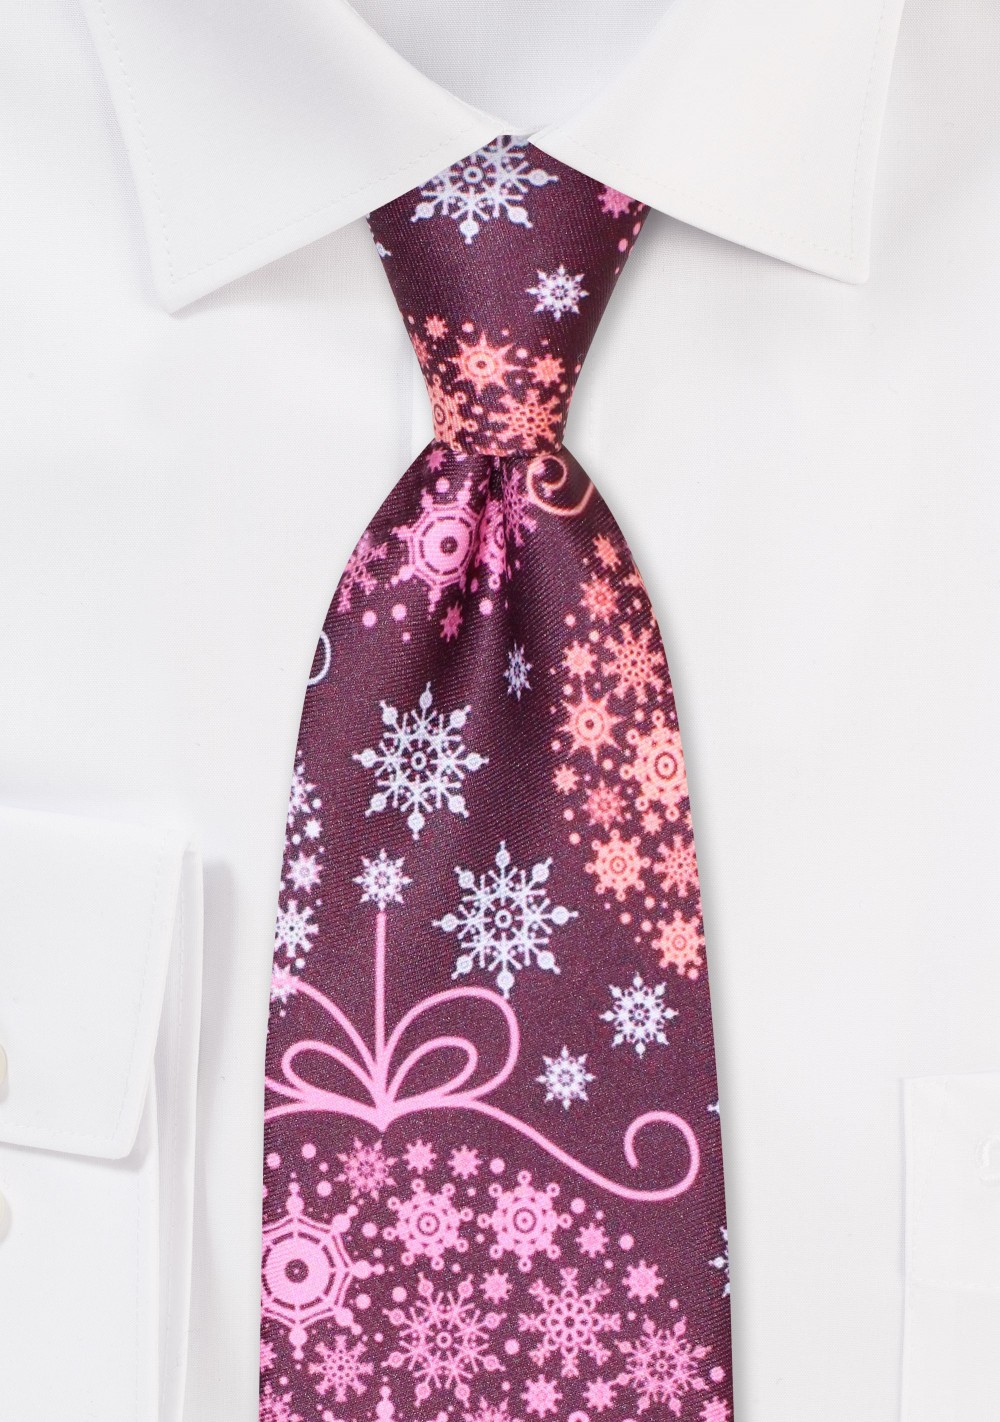 XL Tie in Wine Red with Christmas Ornament Print